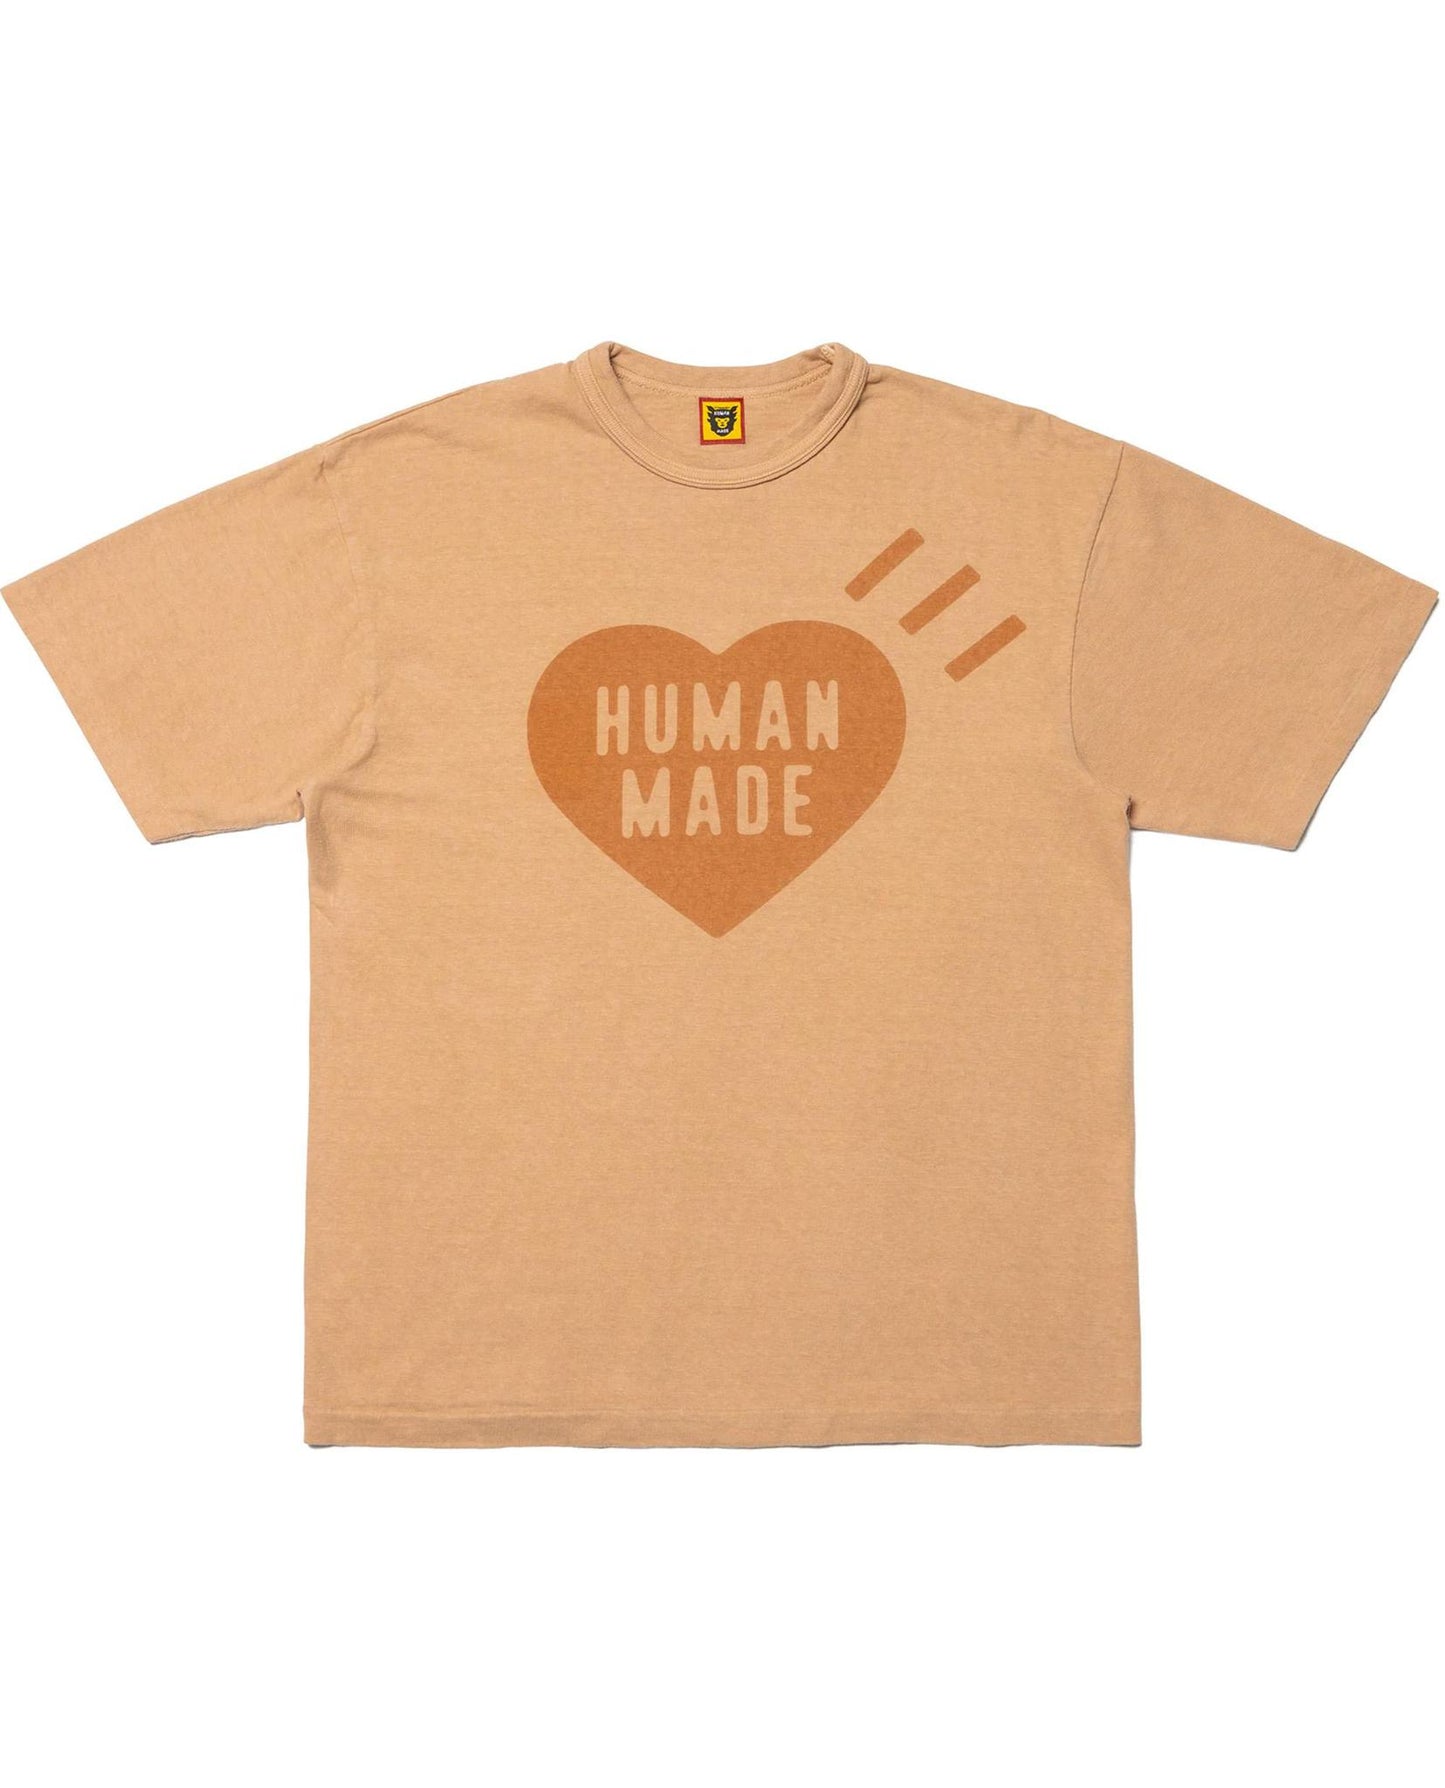 Human Made Plant Dyed T-Shirt #3 | STASHED